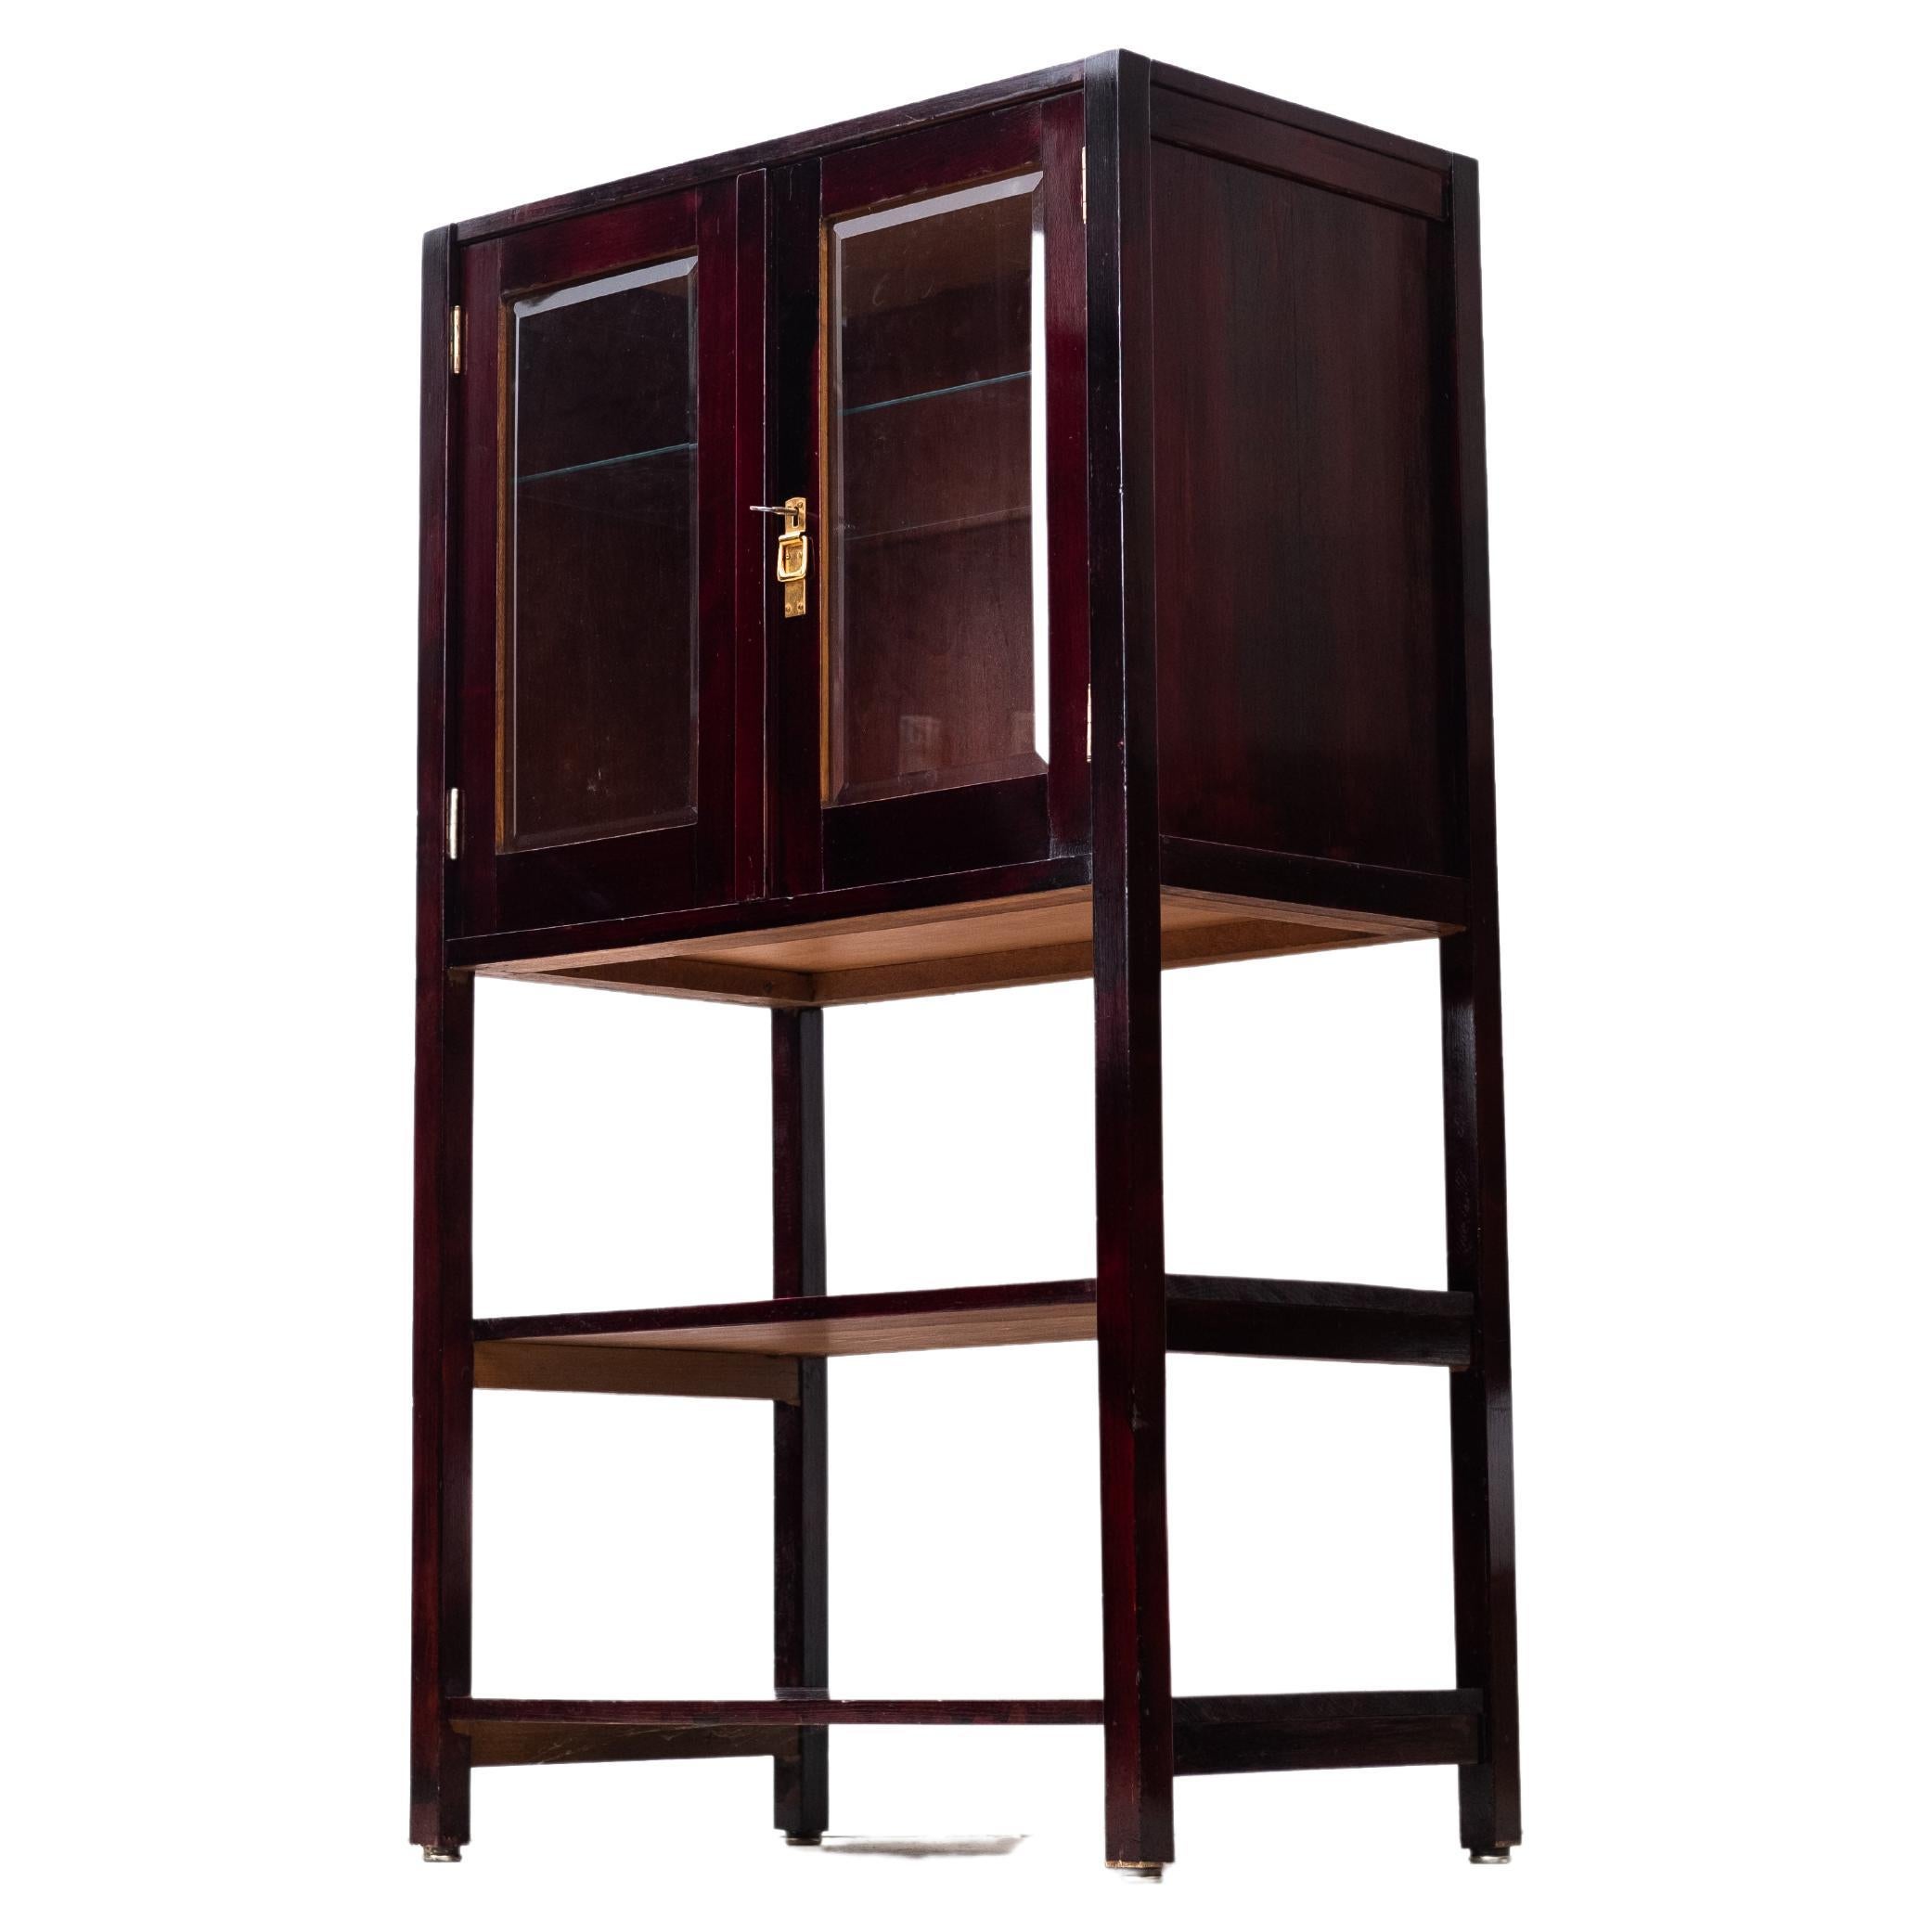 Small Art Nouveau Cabinet by Thonet Brothers (Vienna, 1910) For Sale